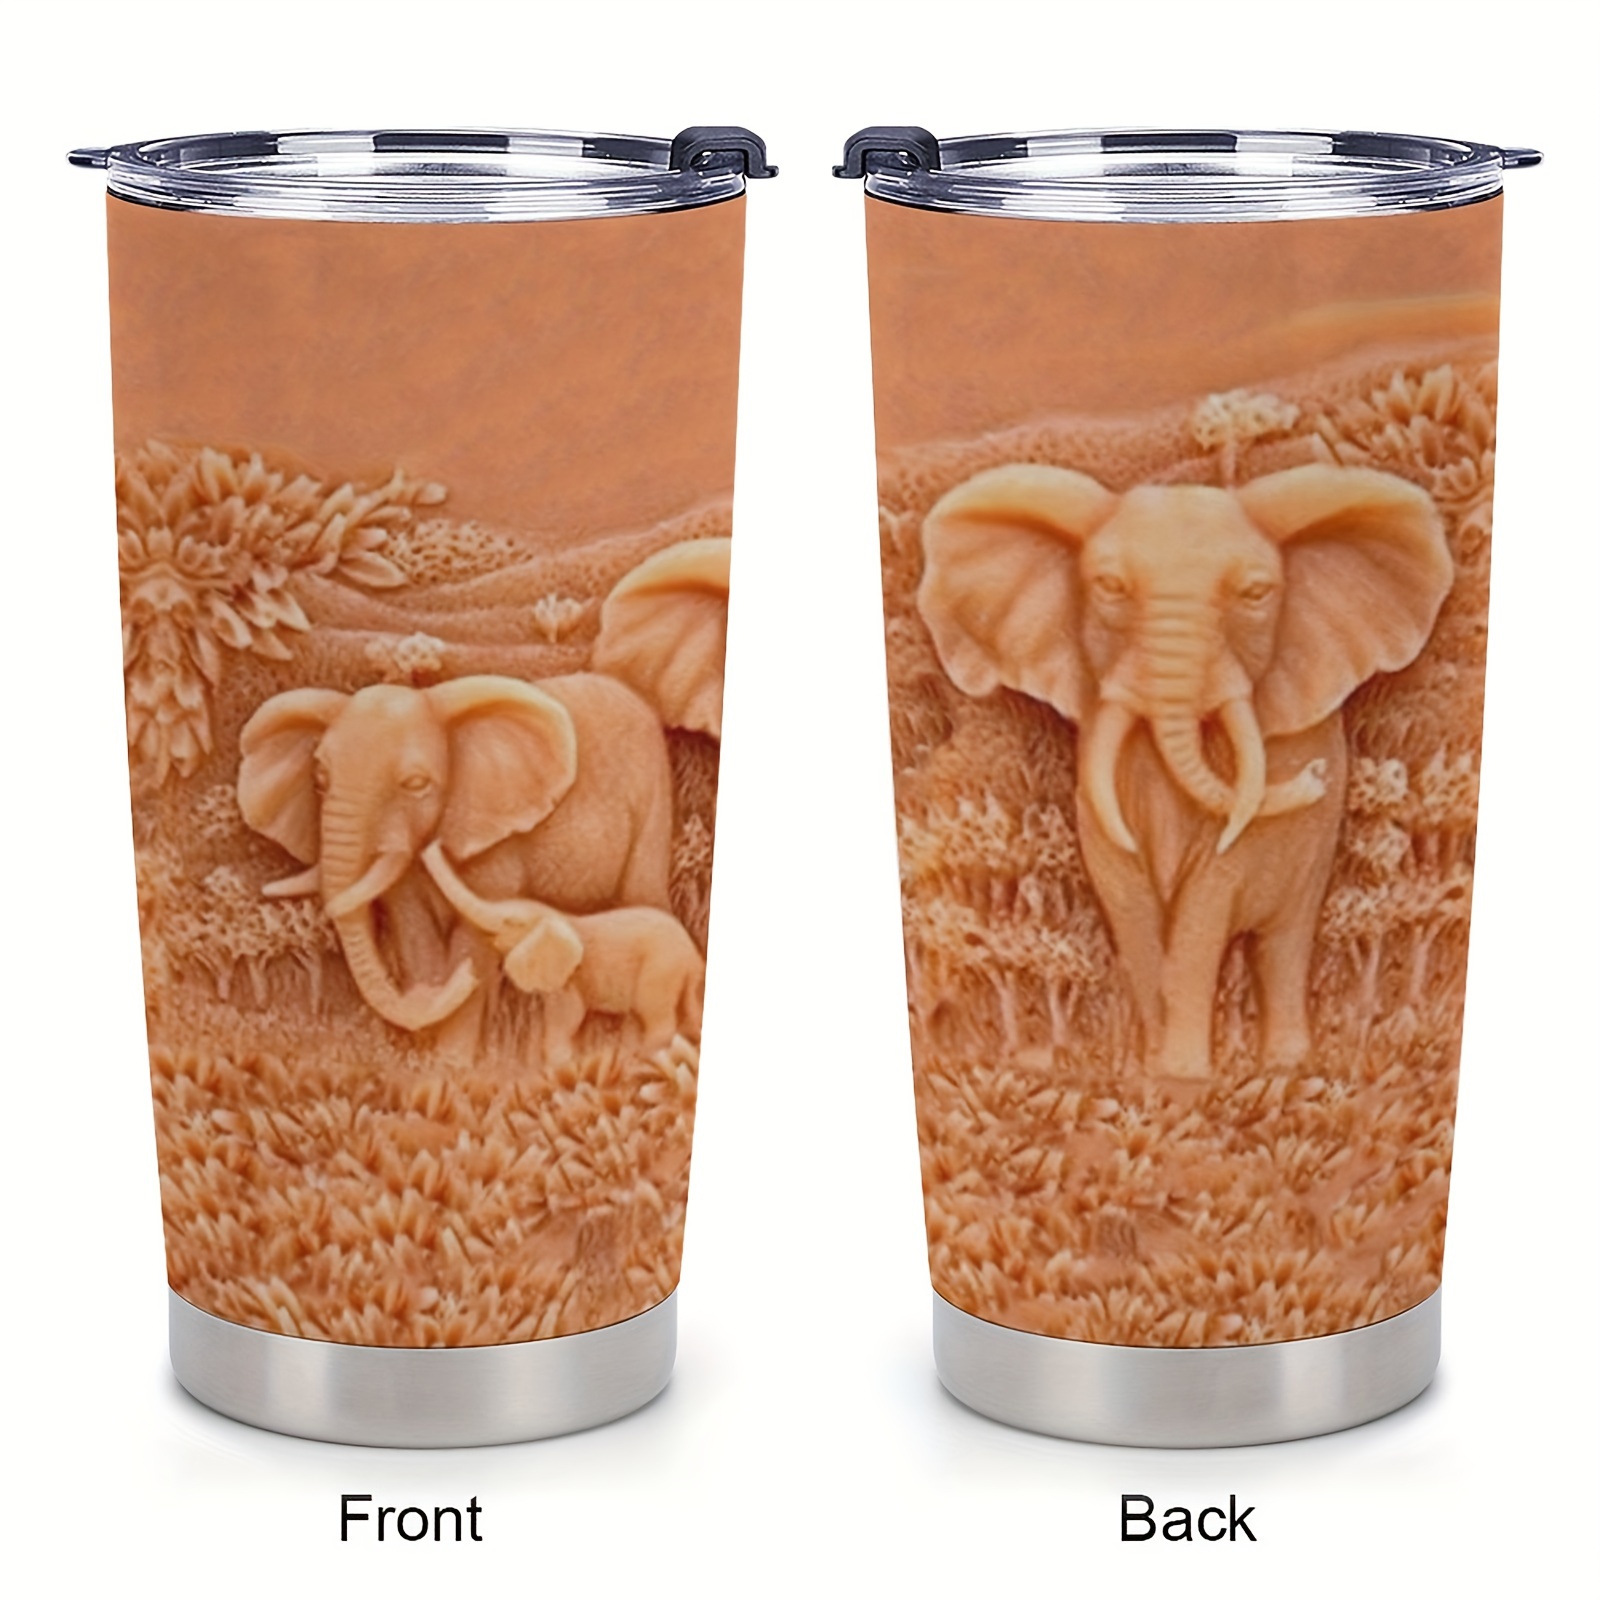 

20oz Elephant Lover Gift Insulated Tumbler With Lid - Stainless Steel Mug Cup For Travel, Office